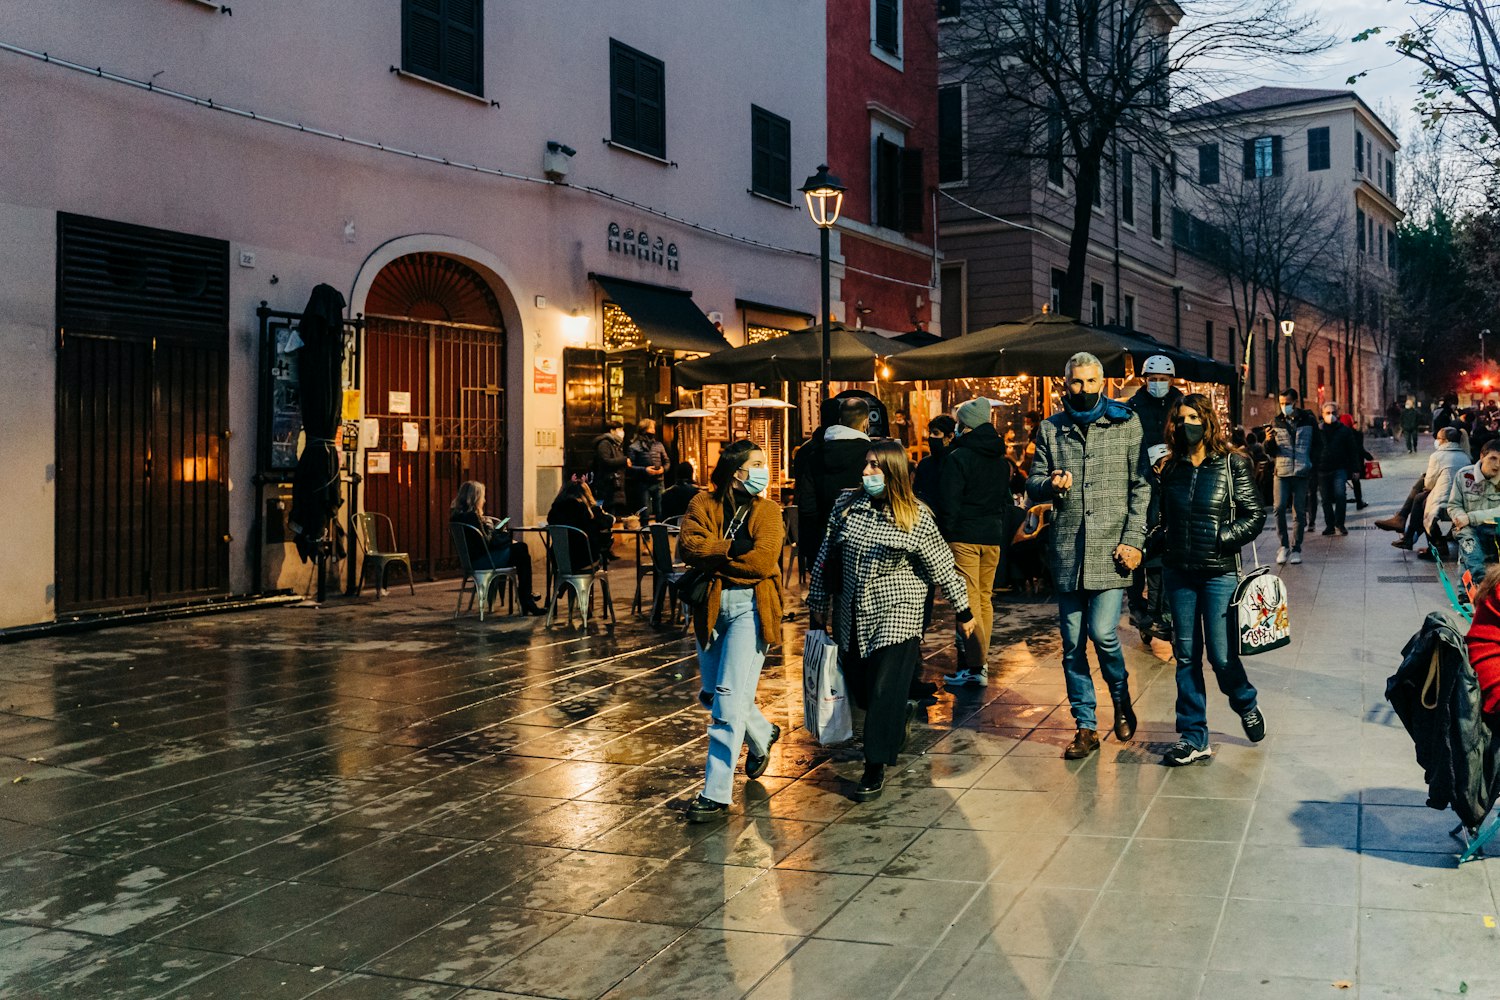 Italian street that shows people cares about fashion and food, peoples walk through the street